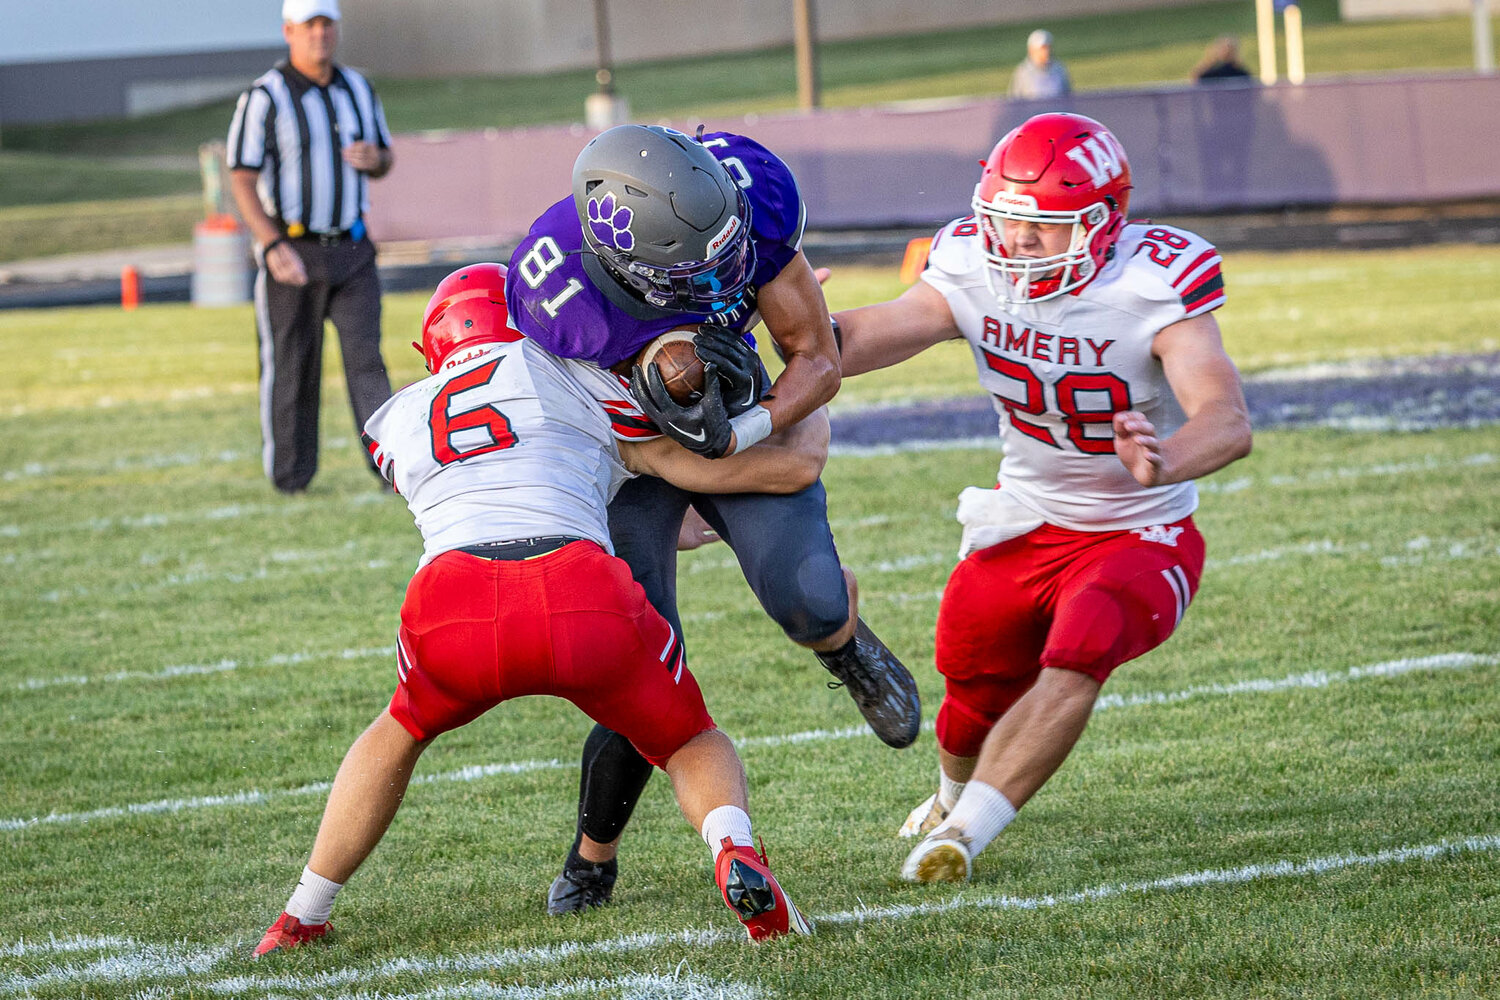 Ellsworth Panthers’ wide receiver George Rohl is tackled by an Amery defender Friday at Fuller Symes Field.